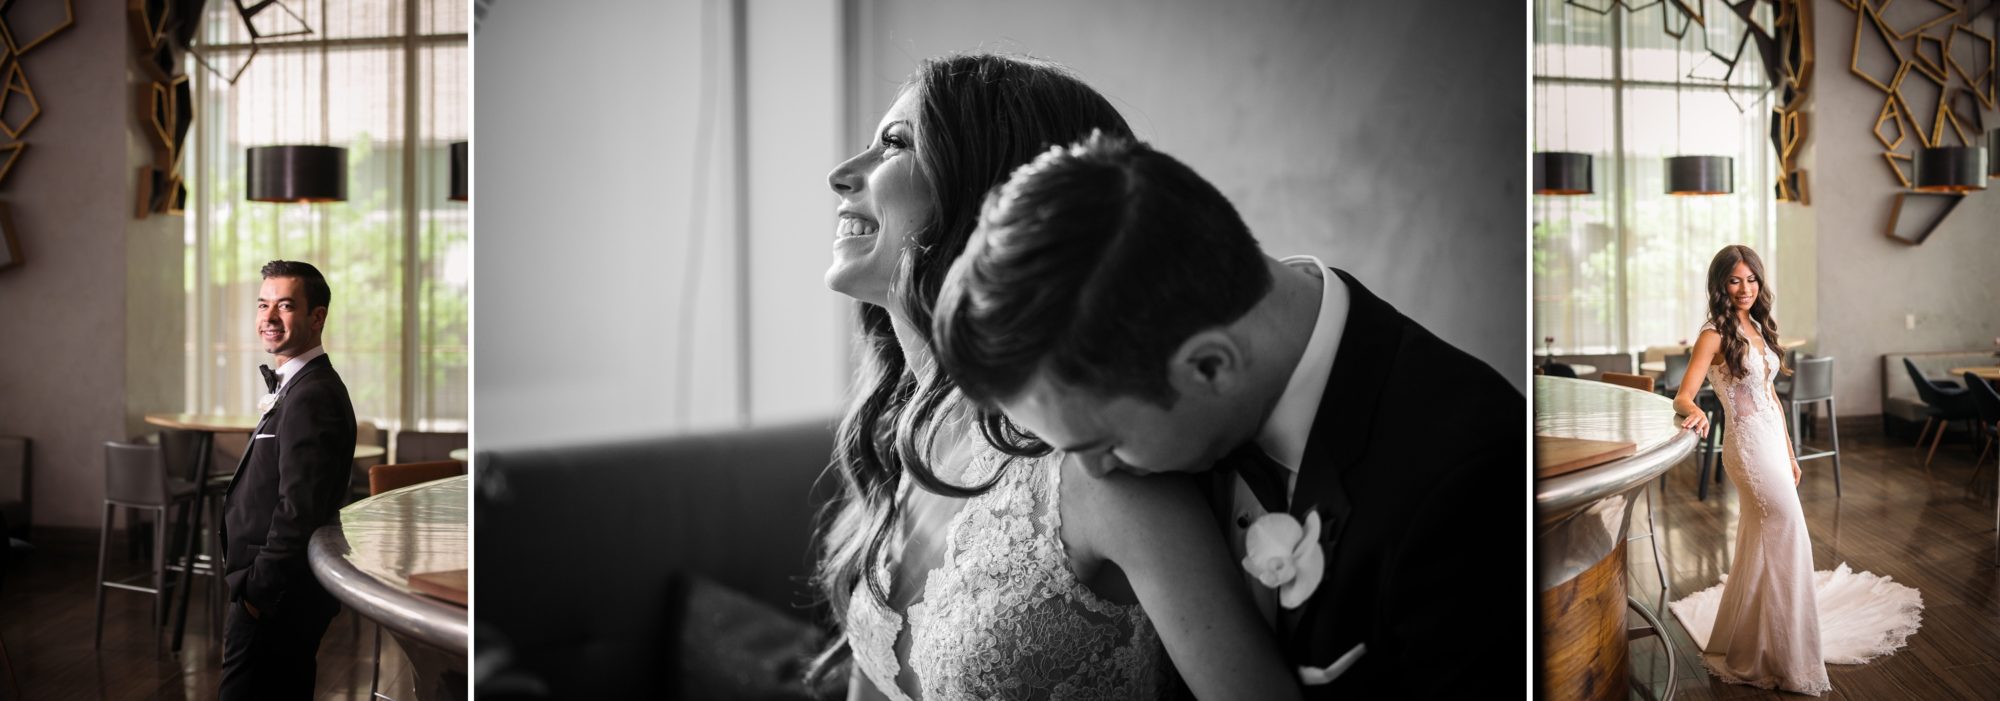 Playful black and white portrait of the groom kissing his bride's shoulder at The Ritz-Carleton, Toronto